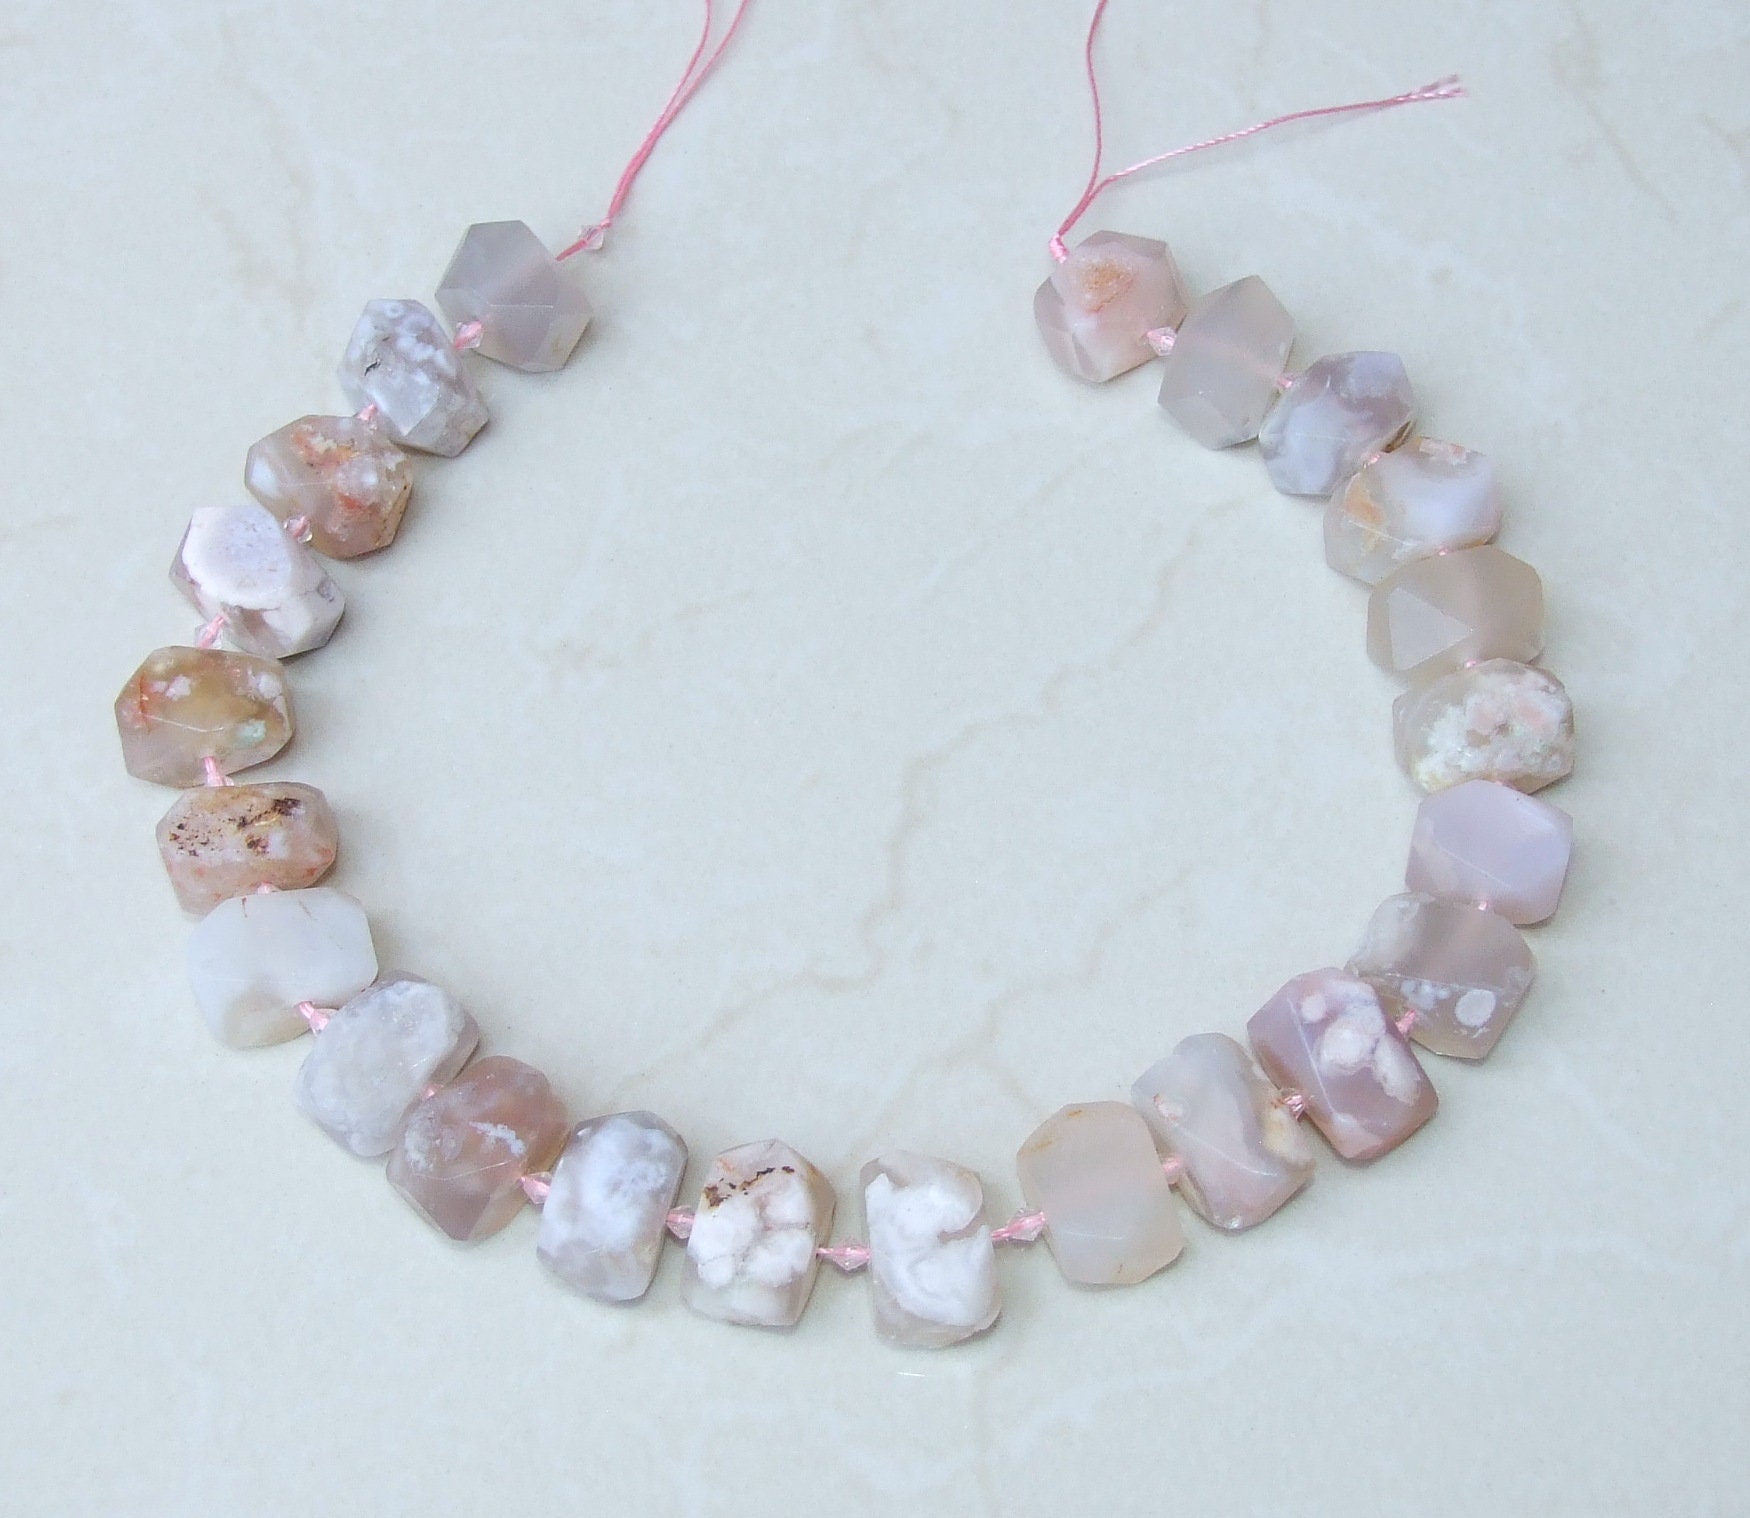 Pink Blossom Agate Faceted Nugget, Blossom Agate Pendant, Gemstone Beads, Polished Blossom Agate, Half Strand - Large 20-22mm, Small 12-14mm